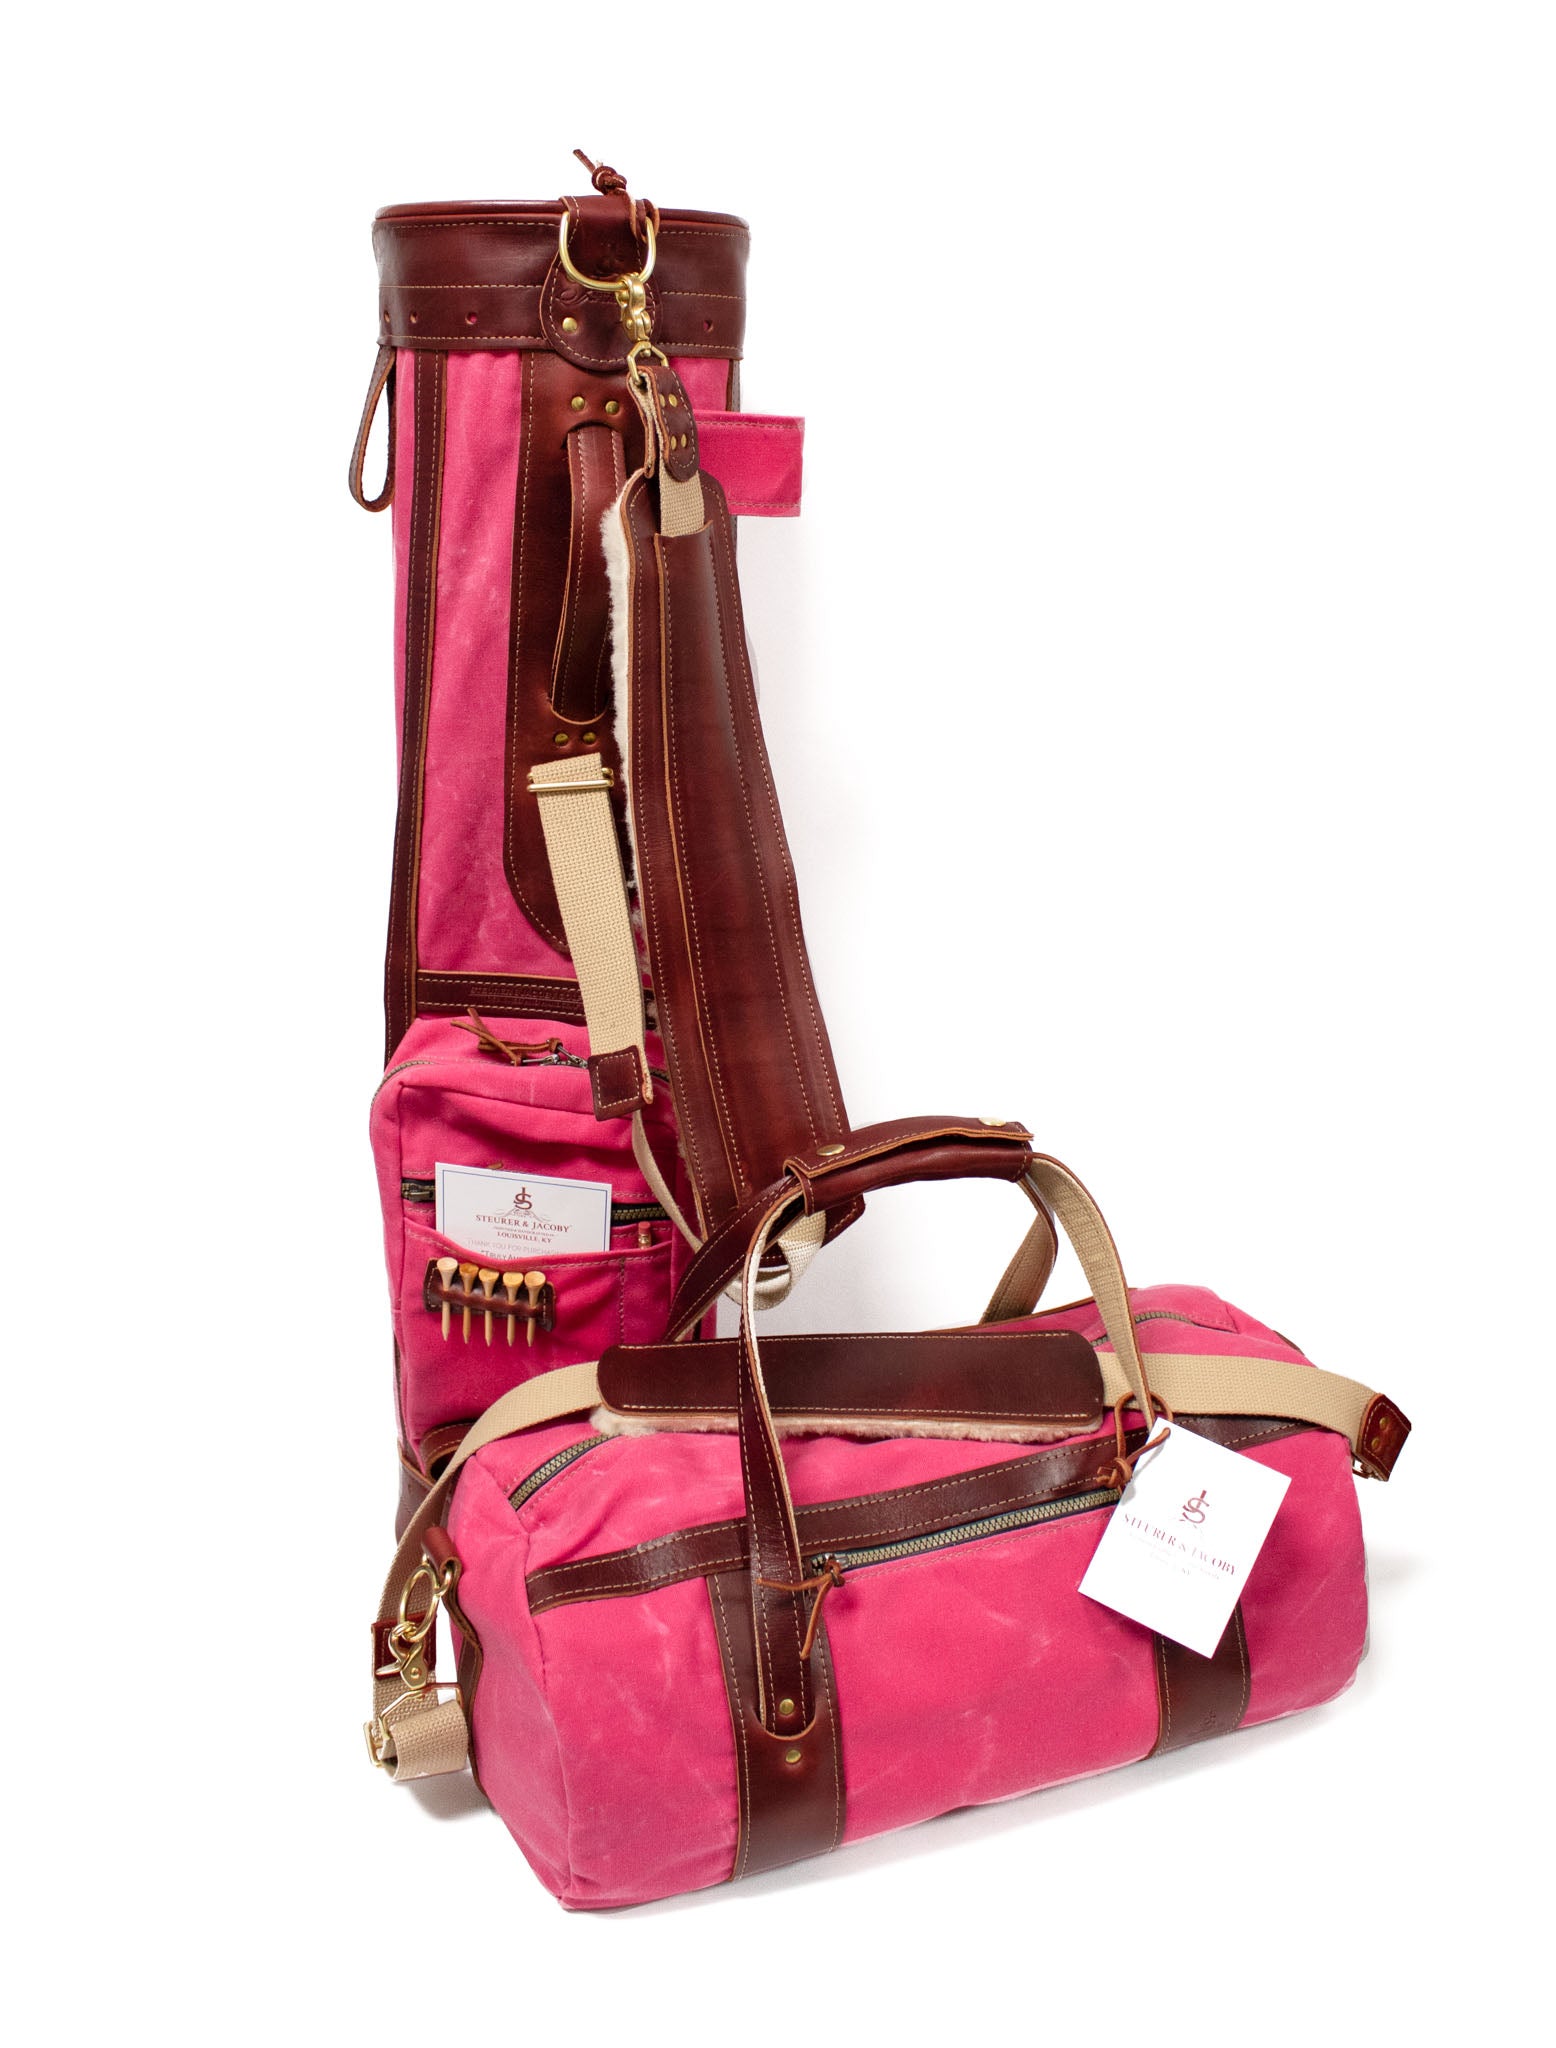 Pink and Burgundy Leather Club Duffel Bag and Sunday Style Golf Bag- Steurer & Jacoby